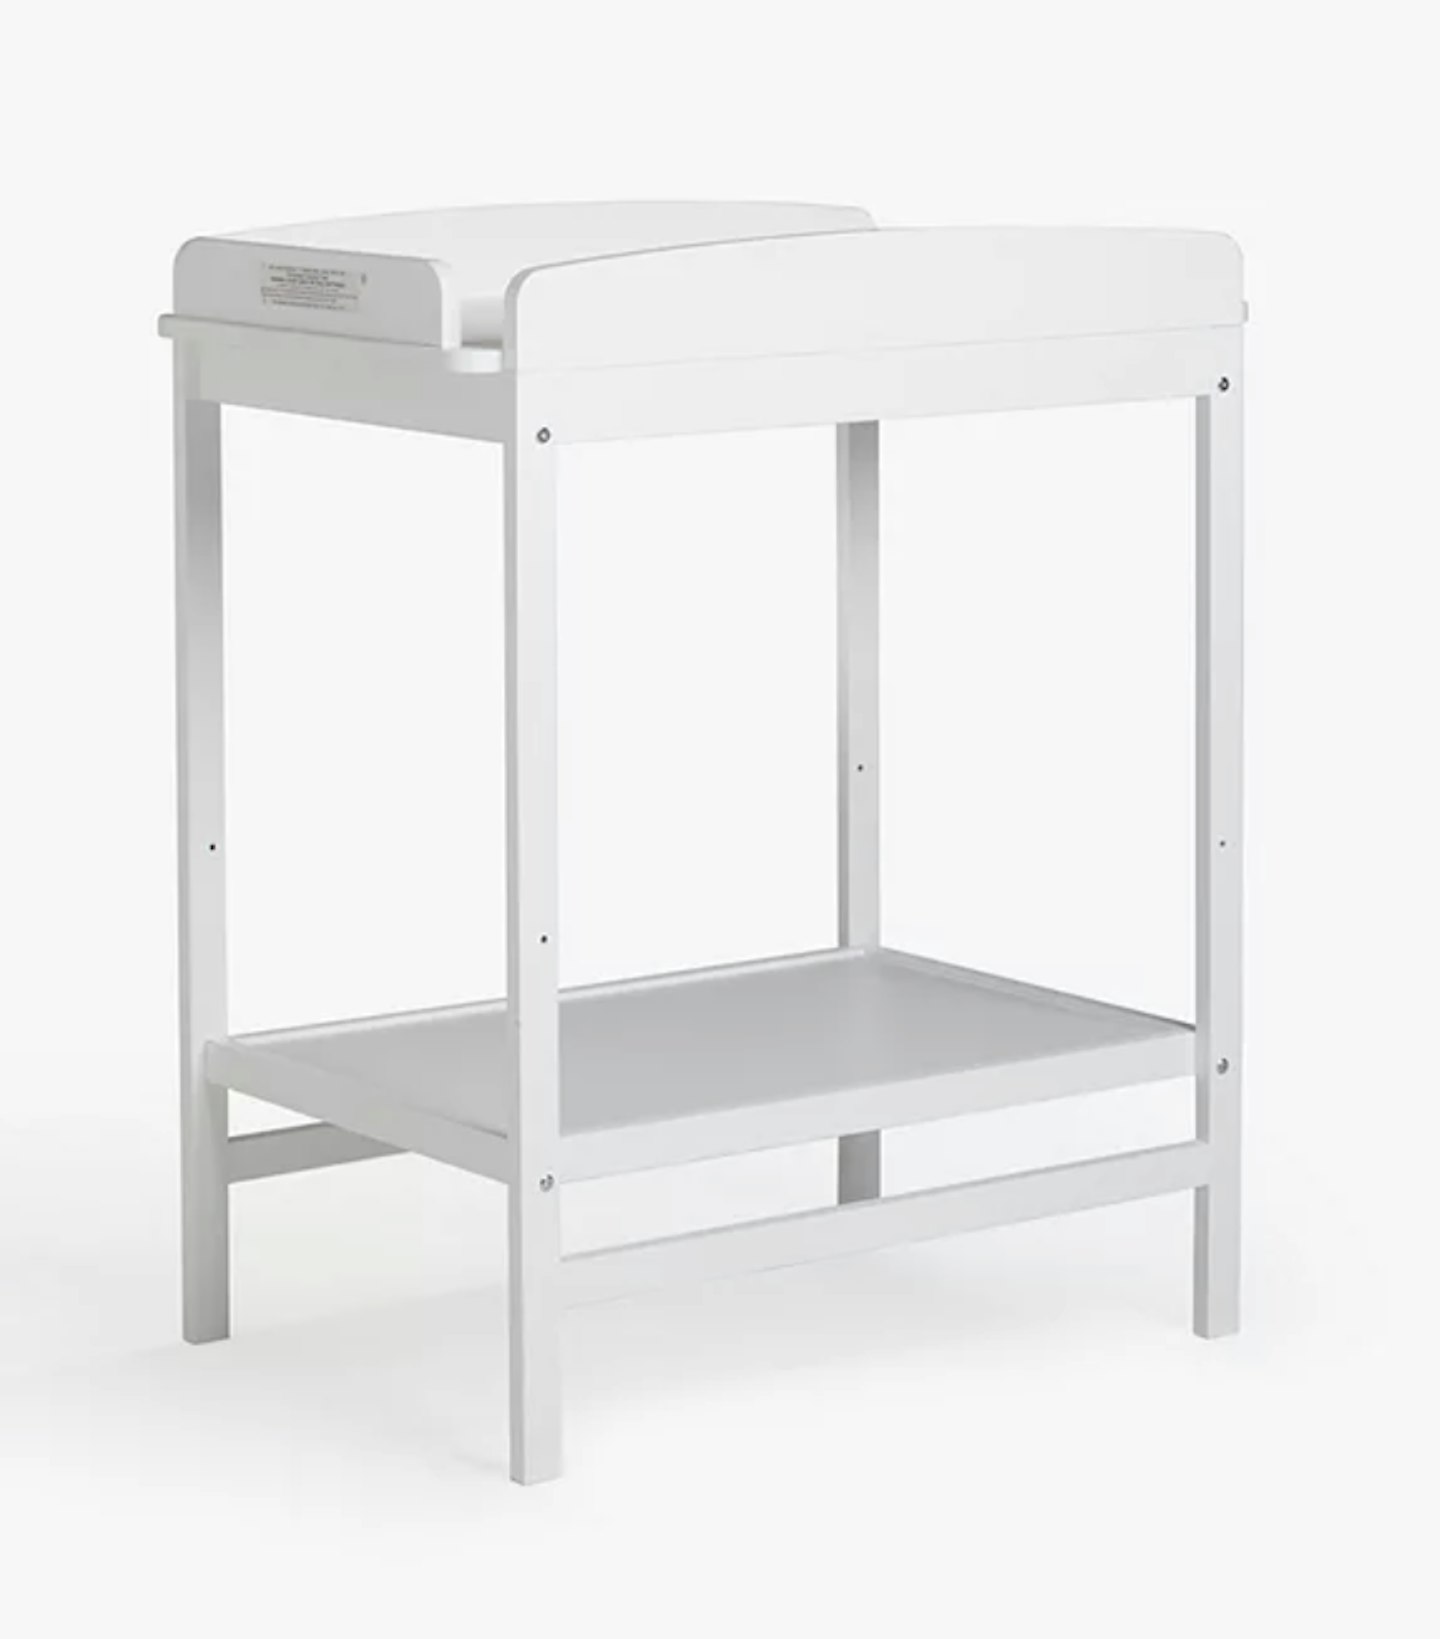 ANYDAY John Lewis u0026amp; Partners Elementary Changing Table